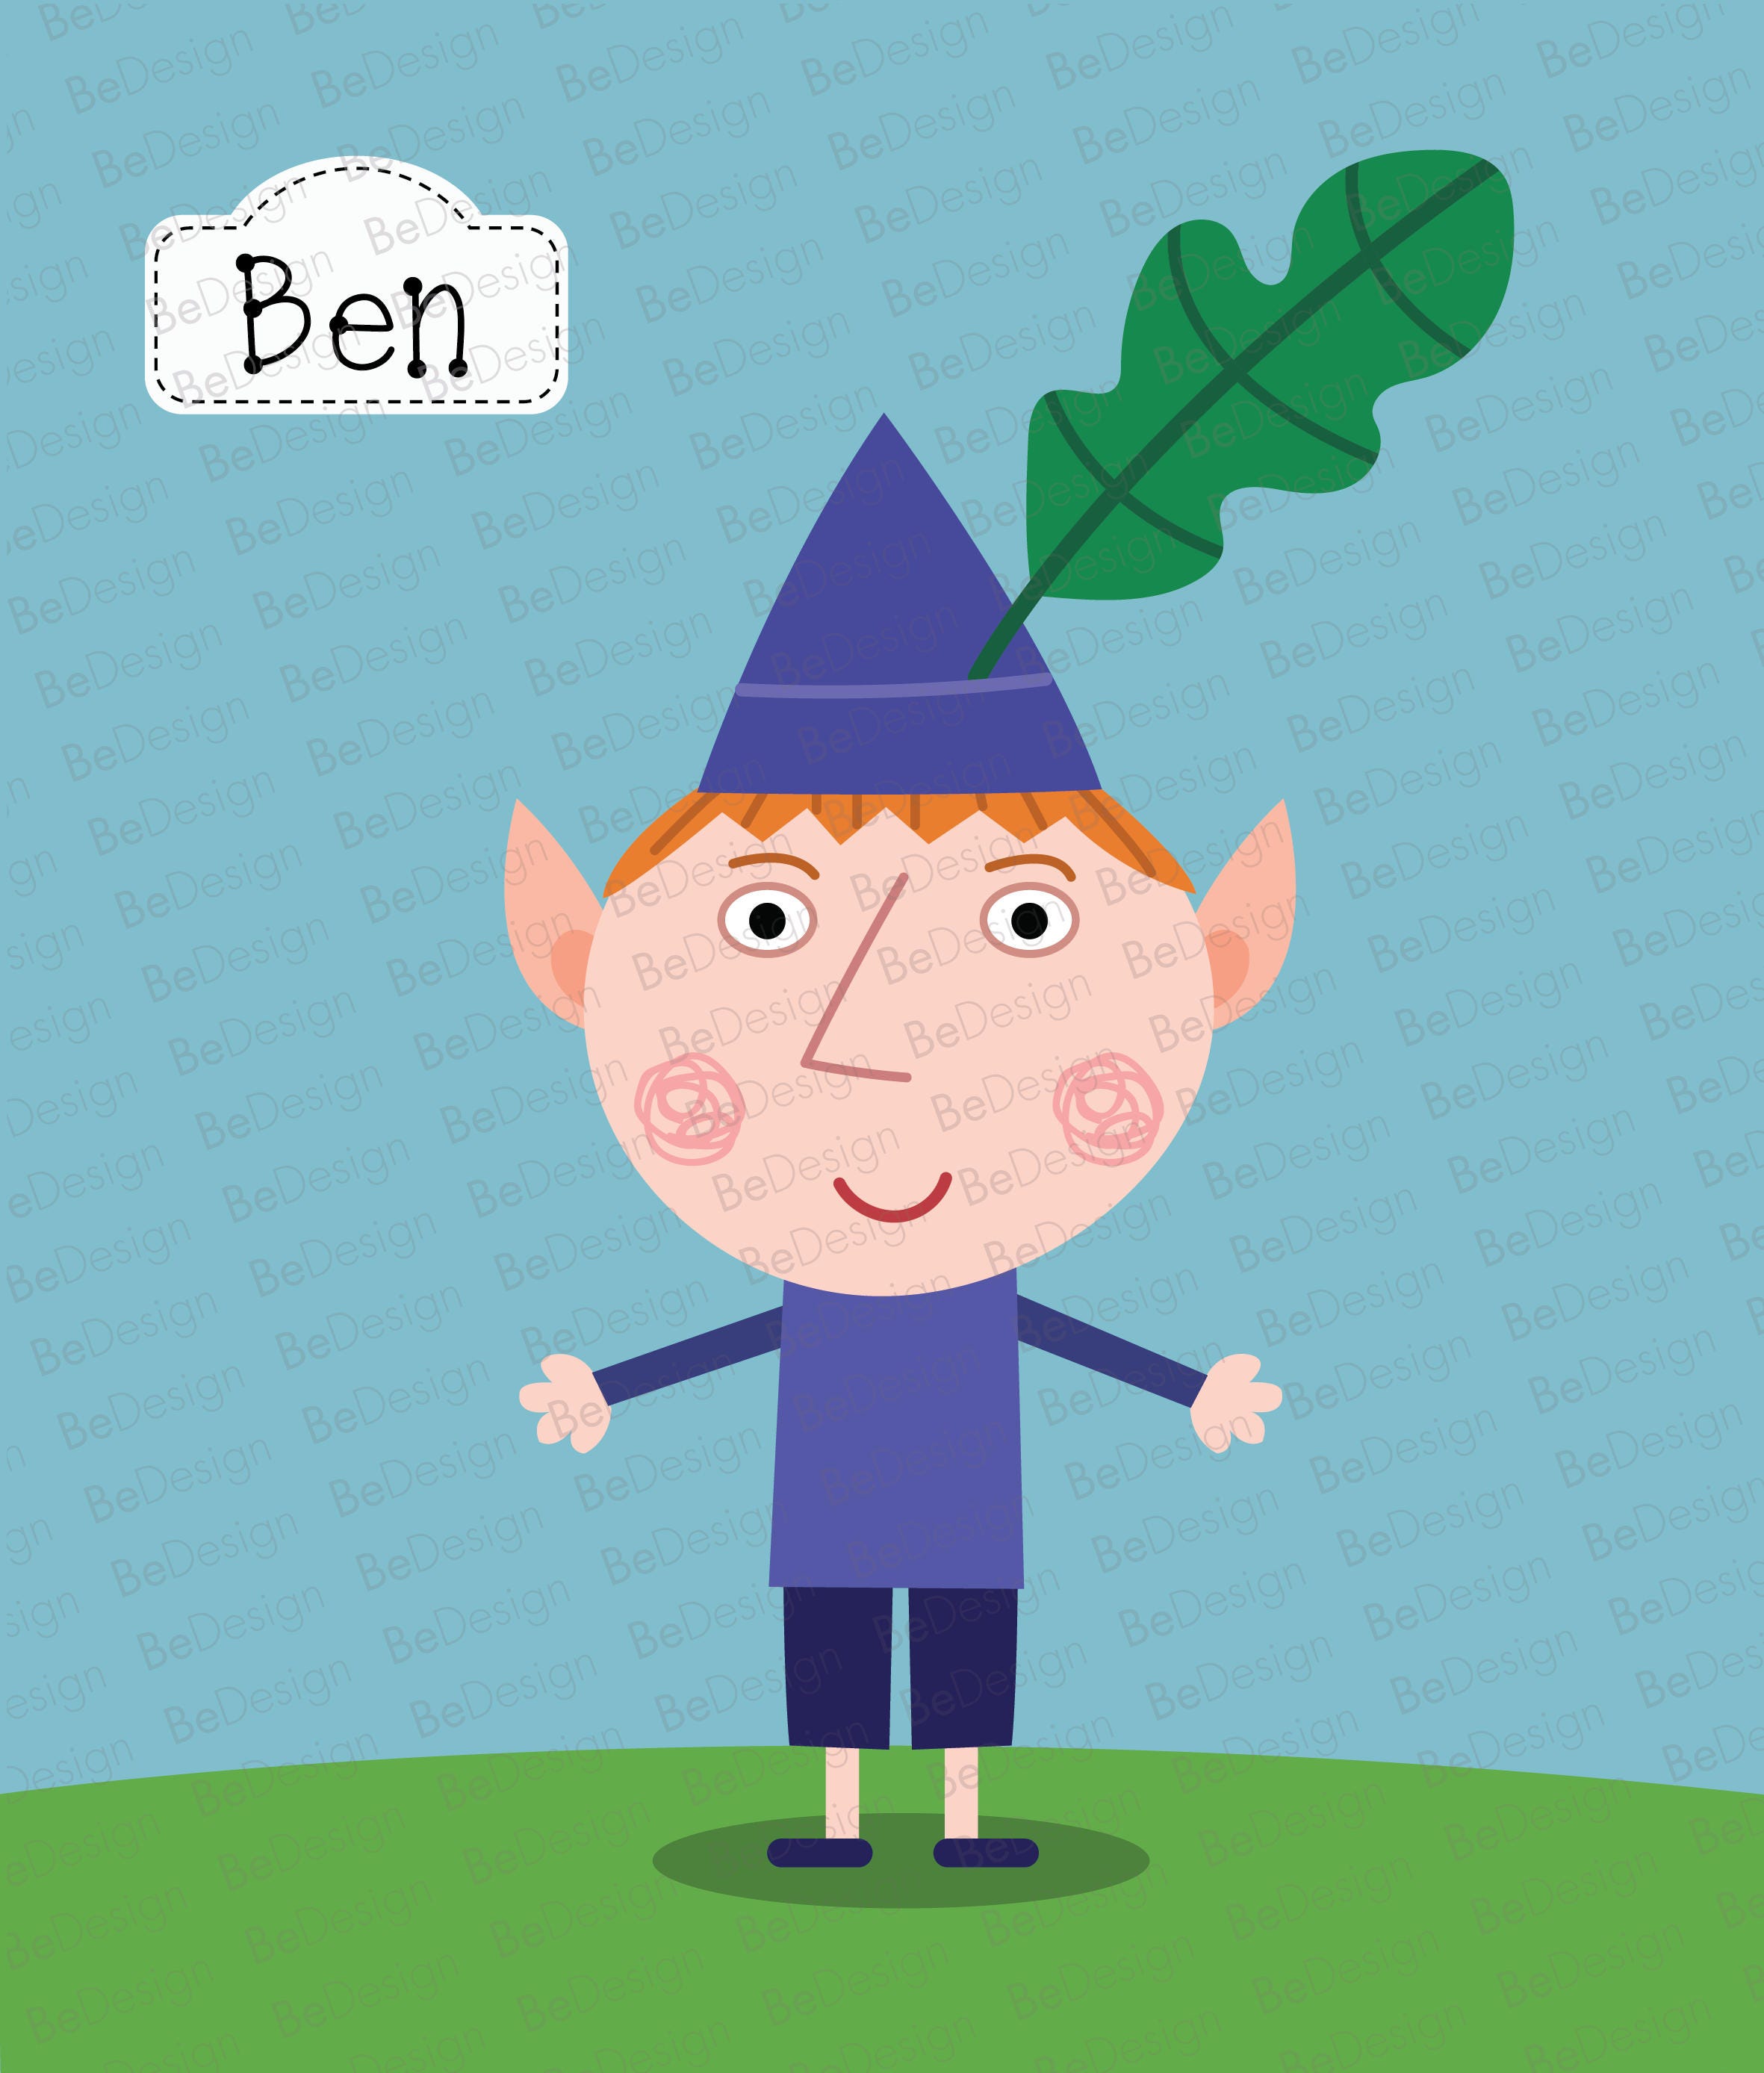 Ben the Elf From Ben and Hollys Little Kingdom - Etsy